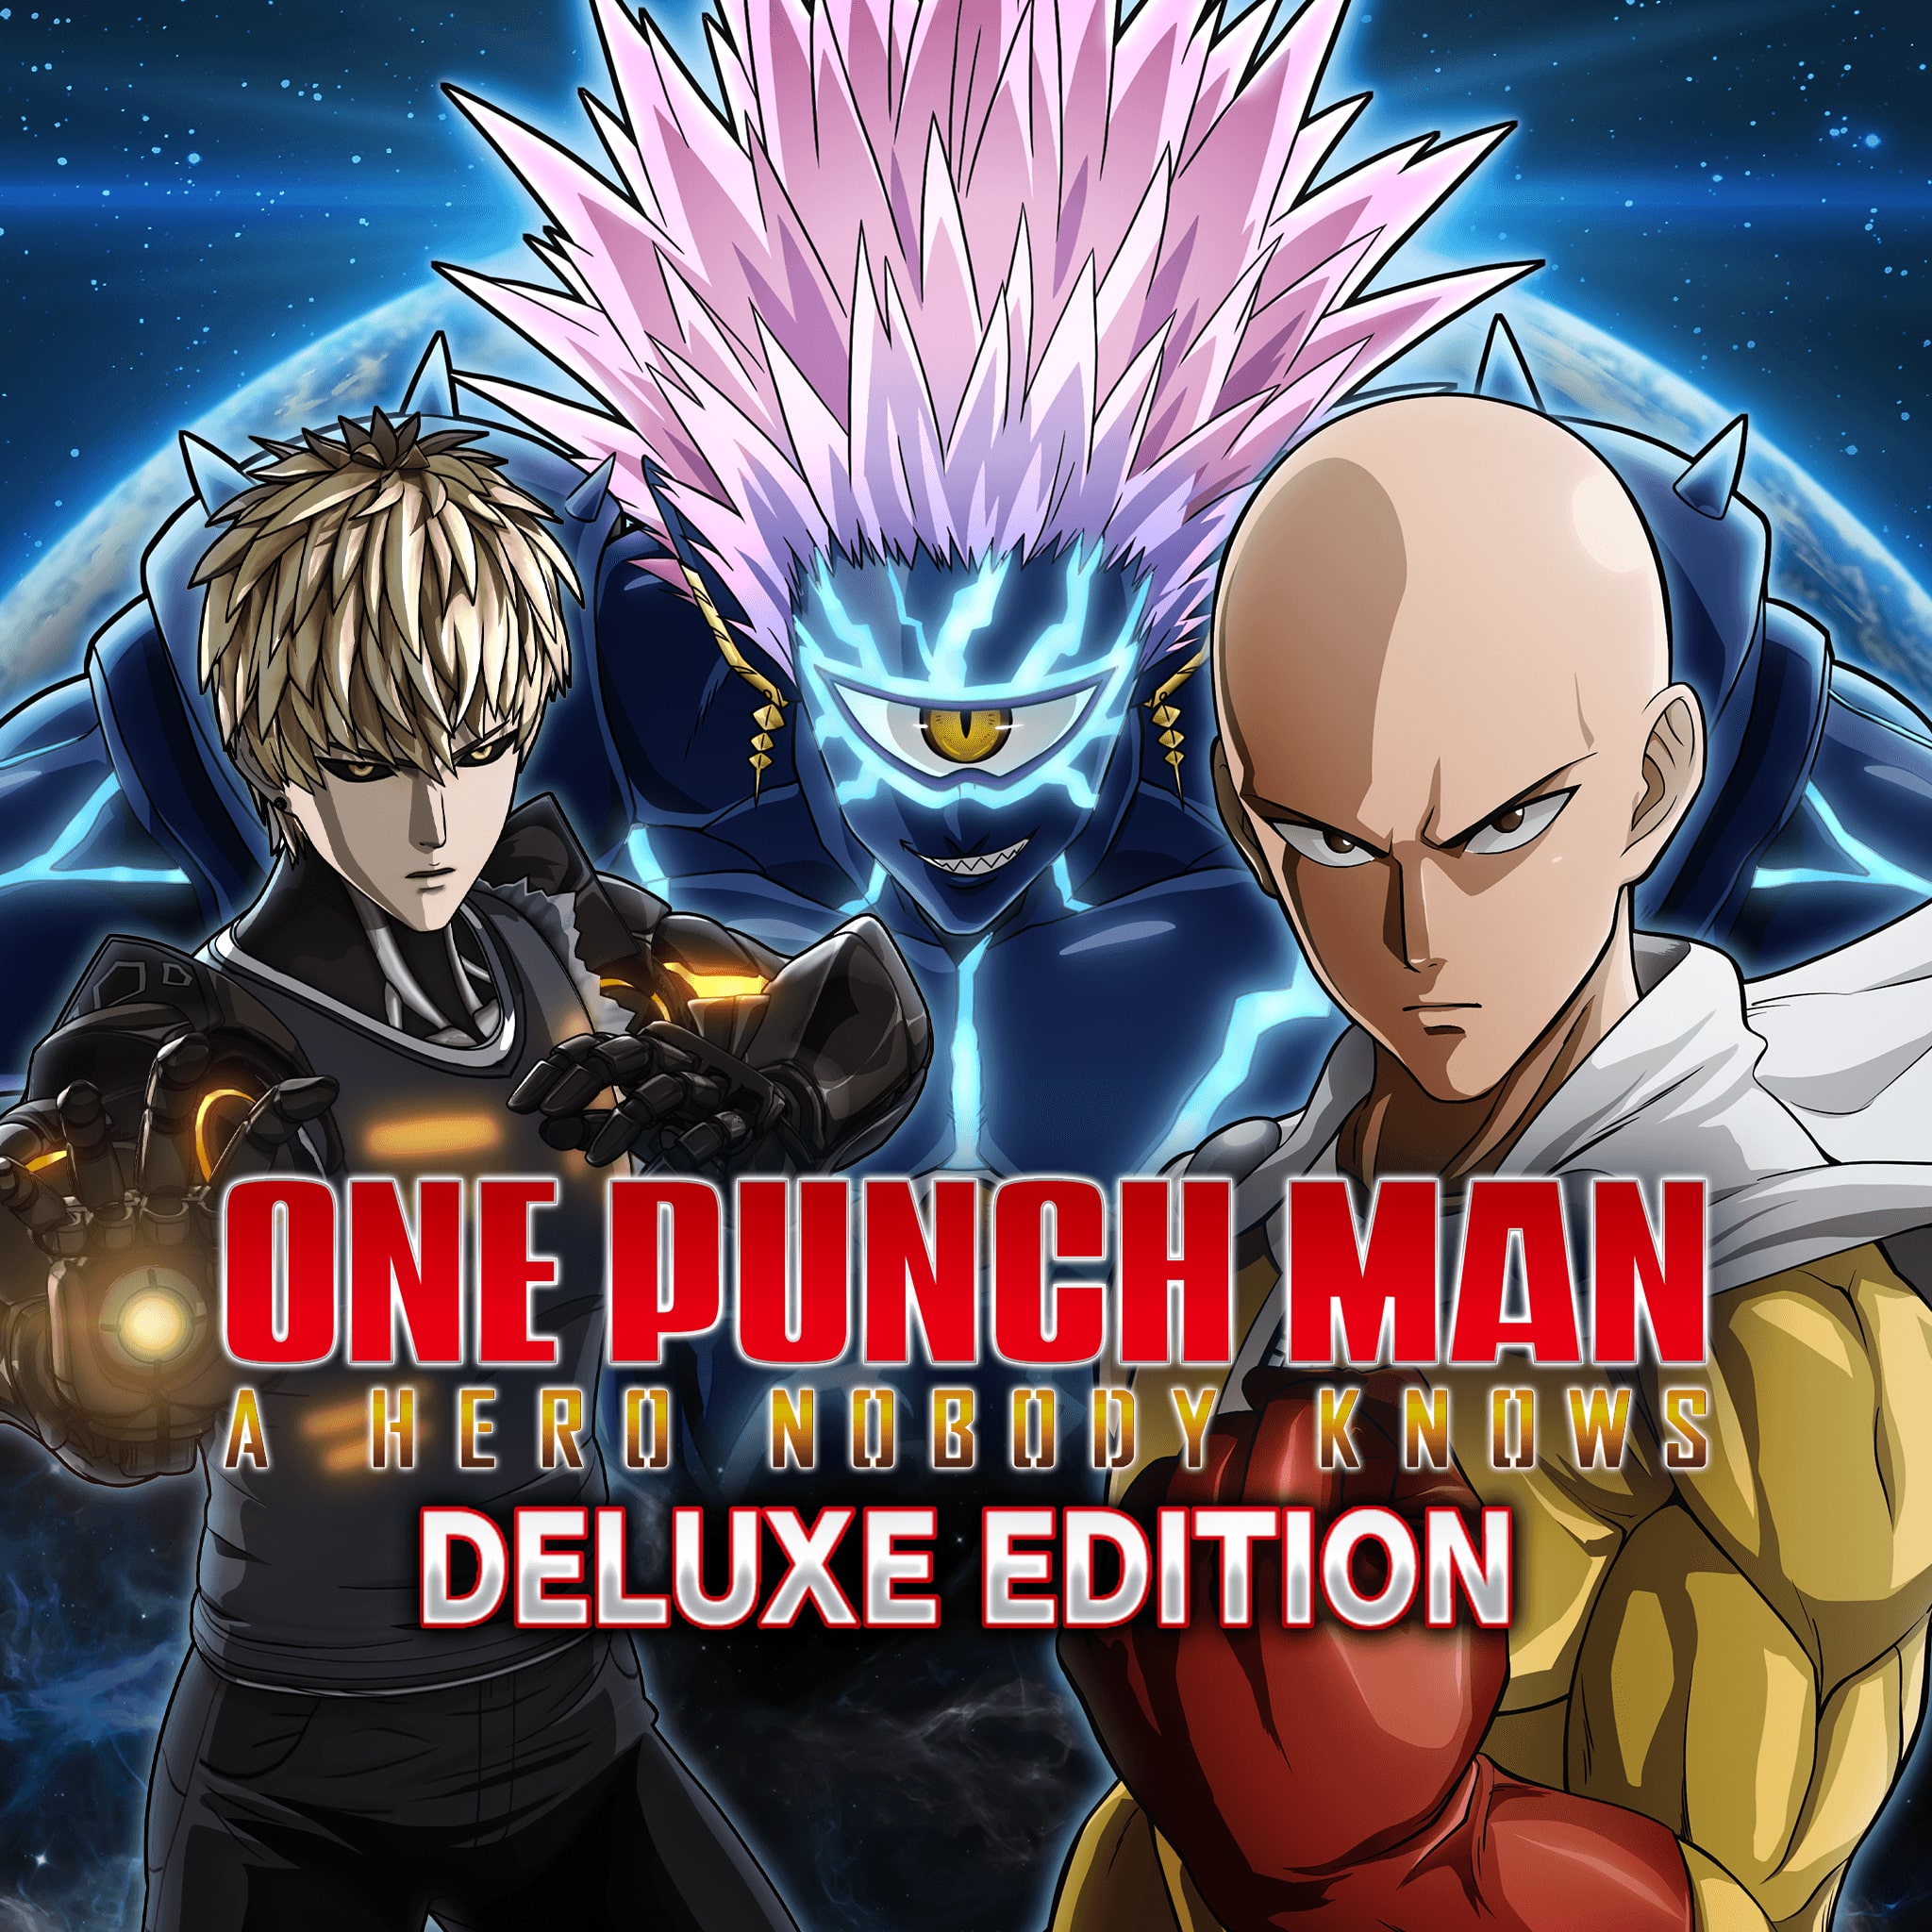 ONE PUNCH MAN: A HERO NOBODY KNOWS Deluxe Edition cover